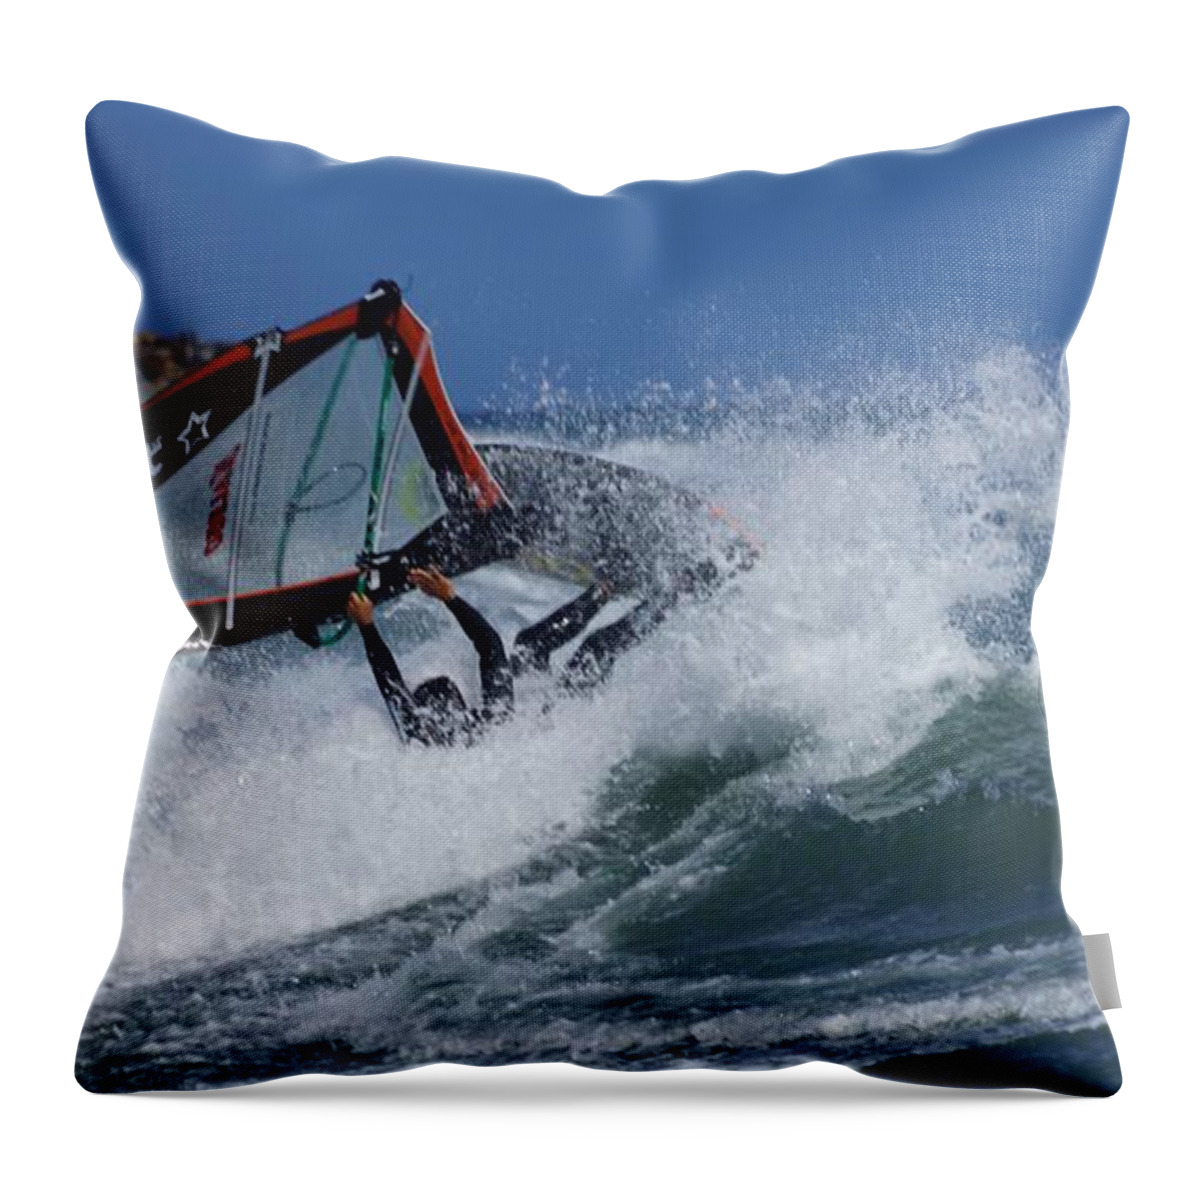 Waves Throw Pillow featuring the photograph Imperia. Maggio 2013. by Marco Cattaruzzi